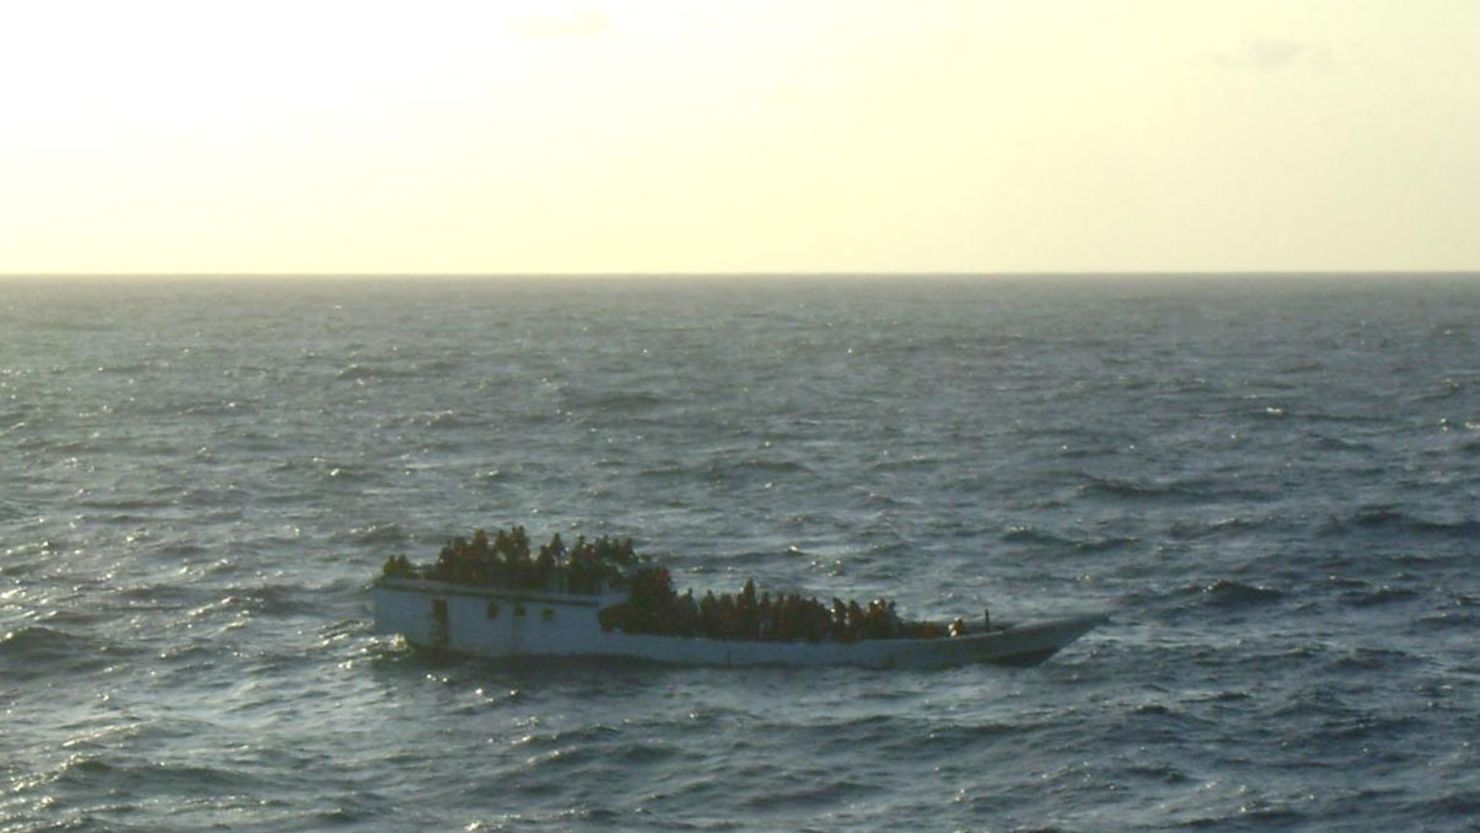 A boat carrying 150 suspected asylum seekers is spotted by Australian authorities prior to its sinking on June 27.